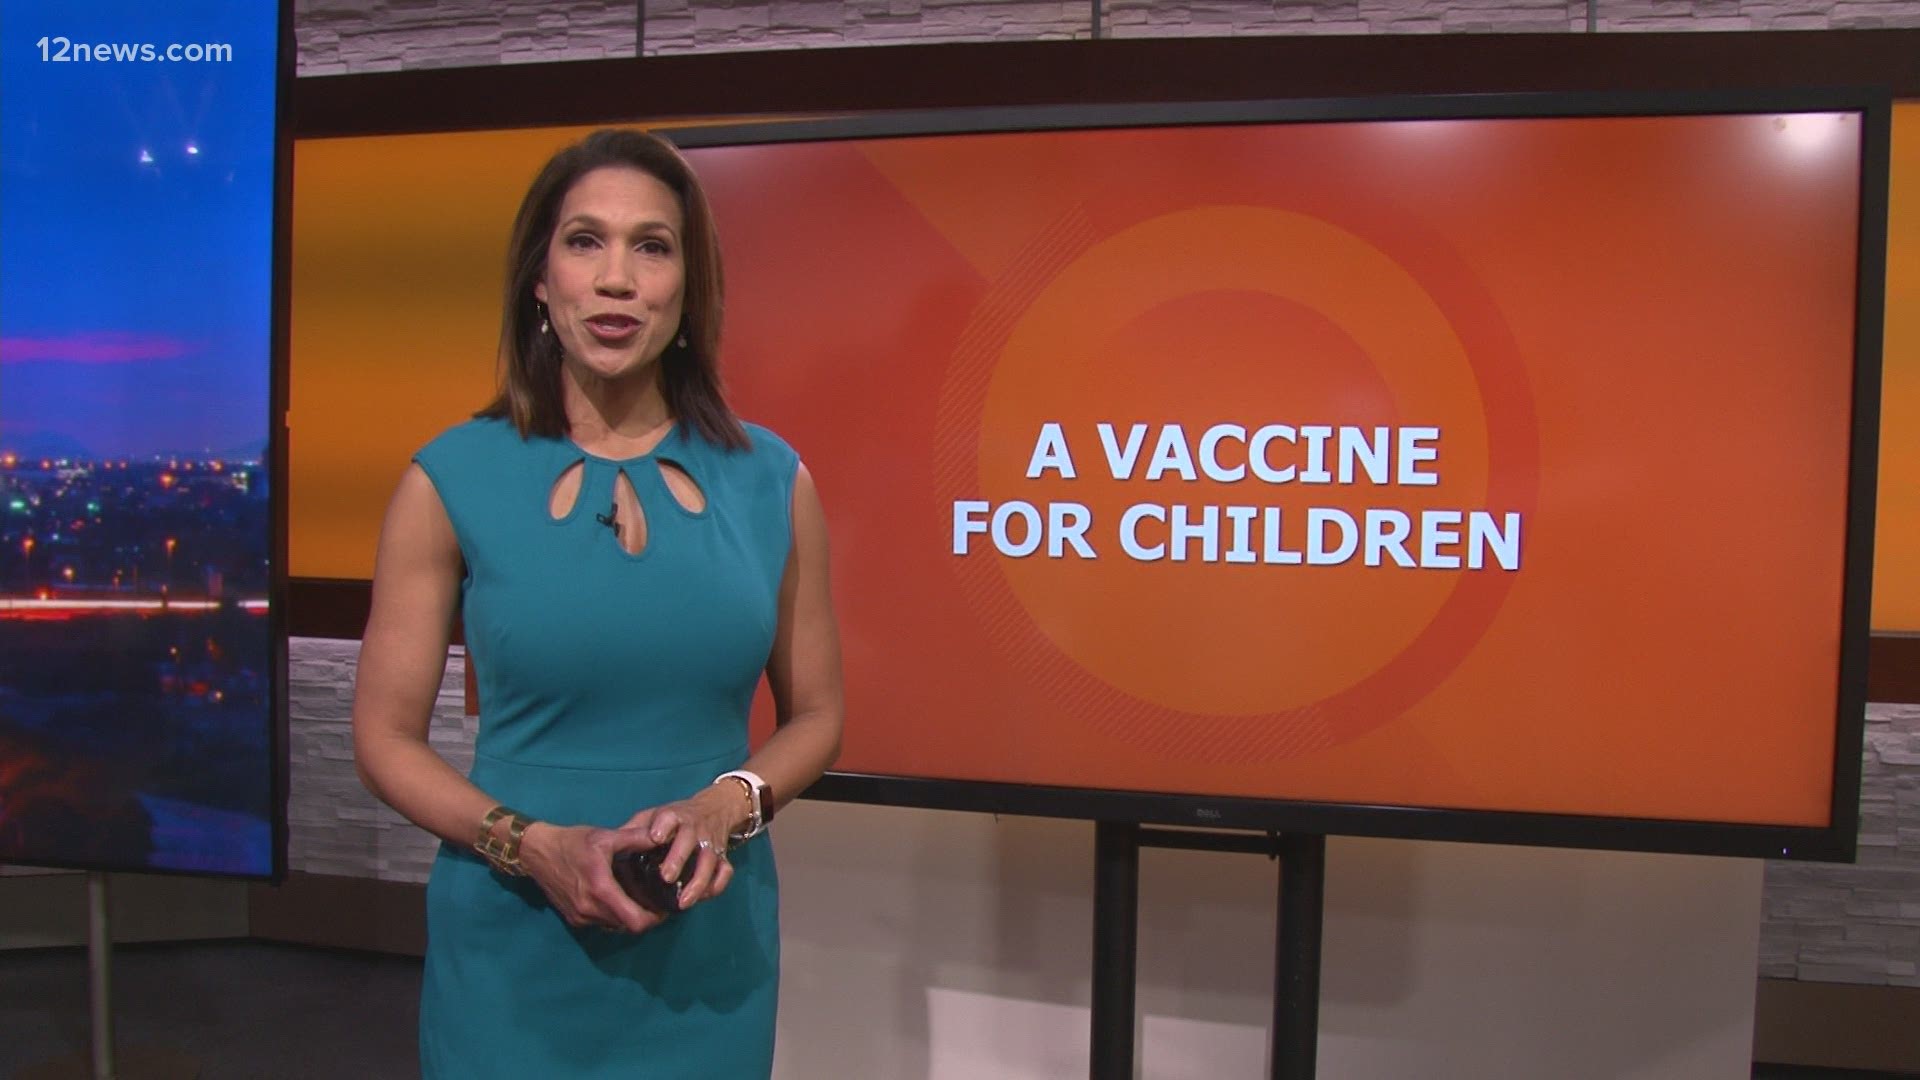 How would you feel about your child getting a COVID-19 vaccine? We asked and Team 12's Rachel McNeill is reading your answers.